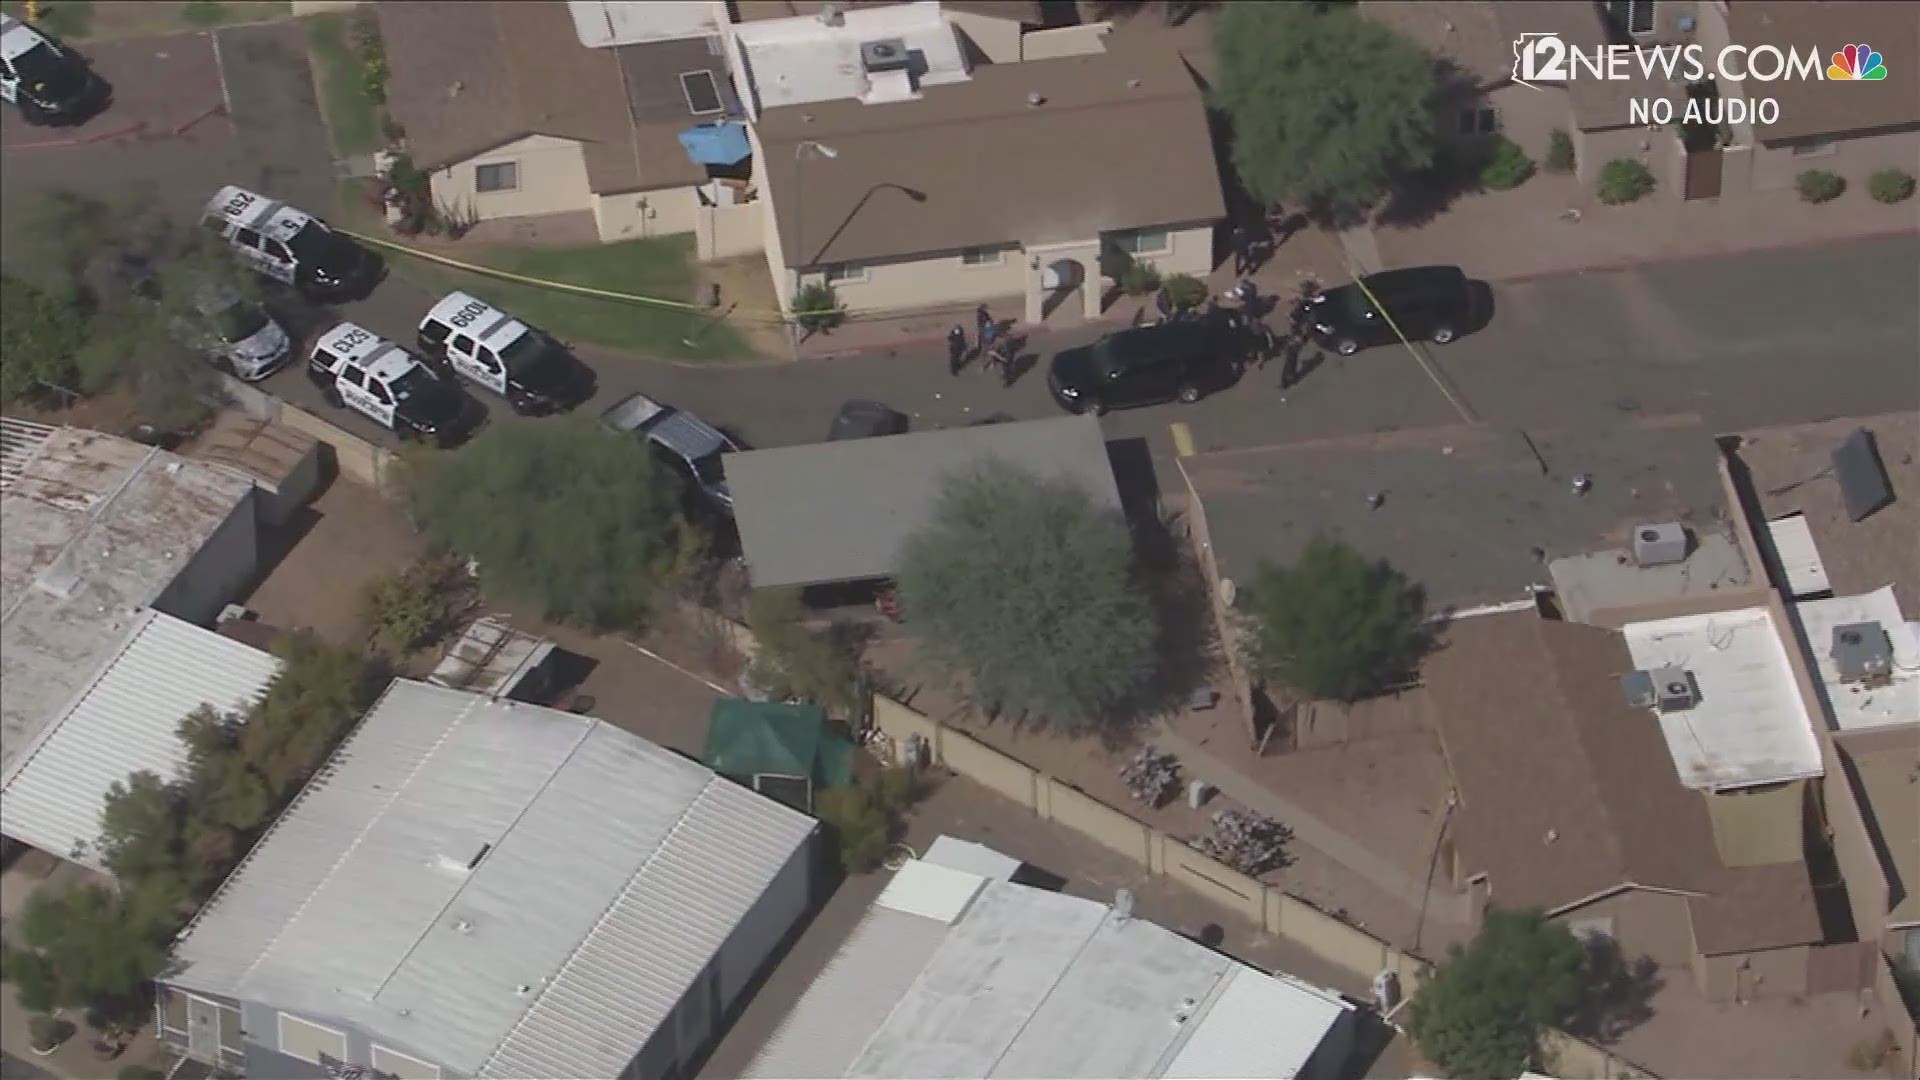 There is an ongoing police situation in Tempe Friday morning in a residential area near University Drive and Evergreen Road. Sky 12 was over the scene.